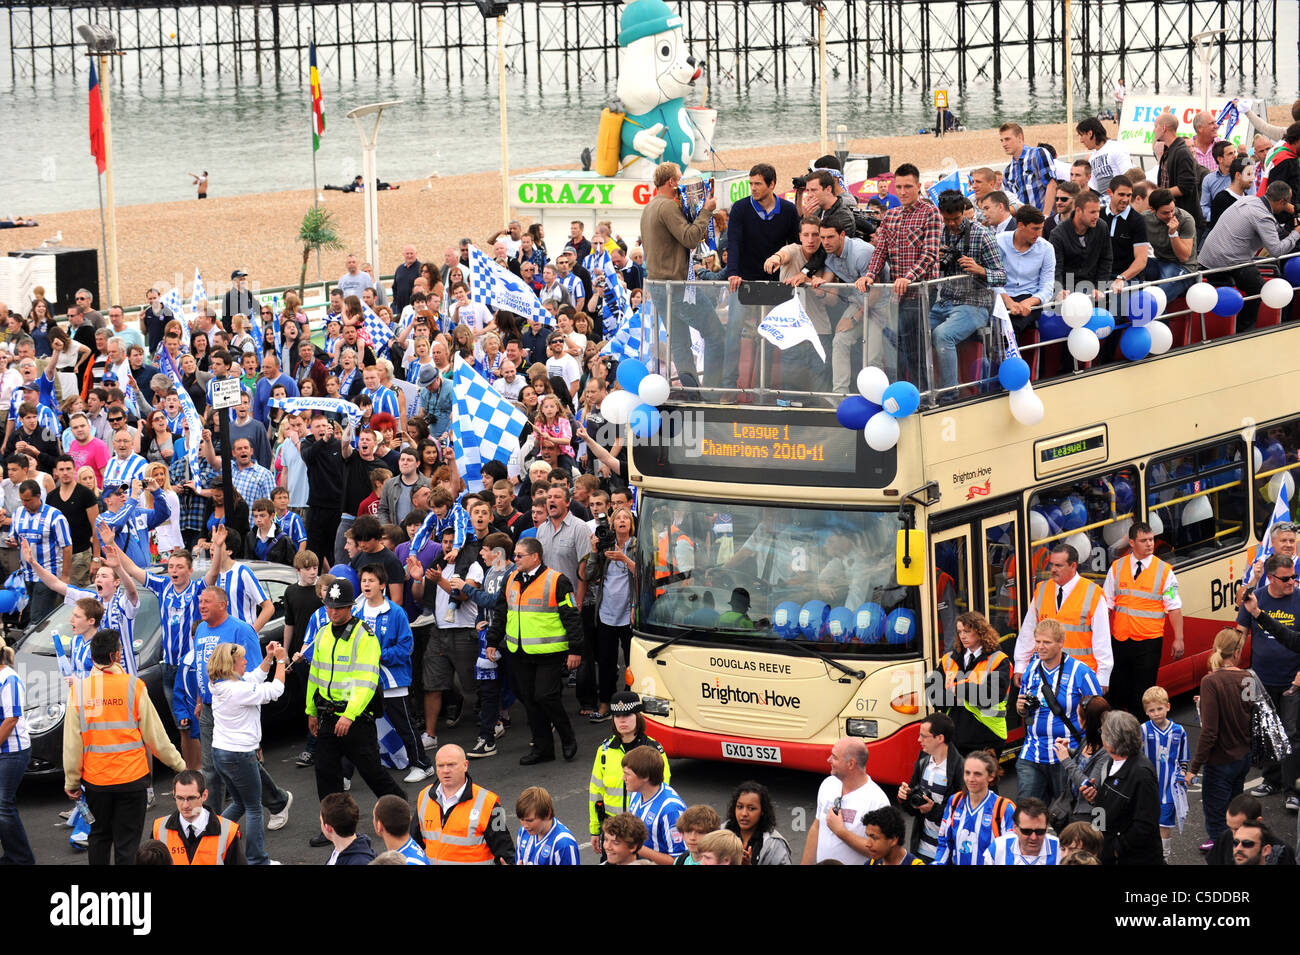 Brighton and Hove Albion on their League 1 title victory bus parade along the Brighton seafront Stock Photo